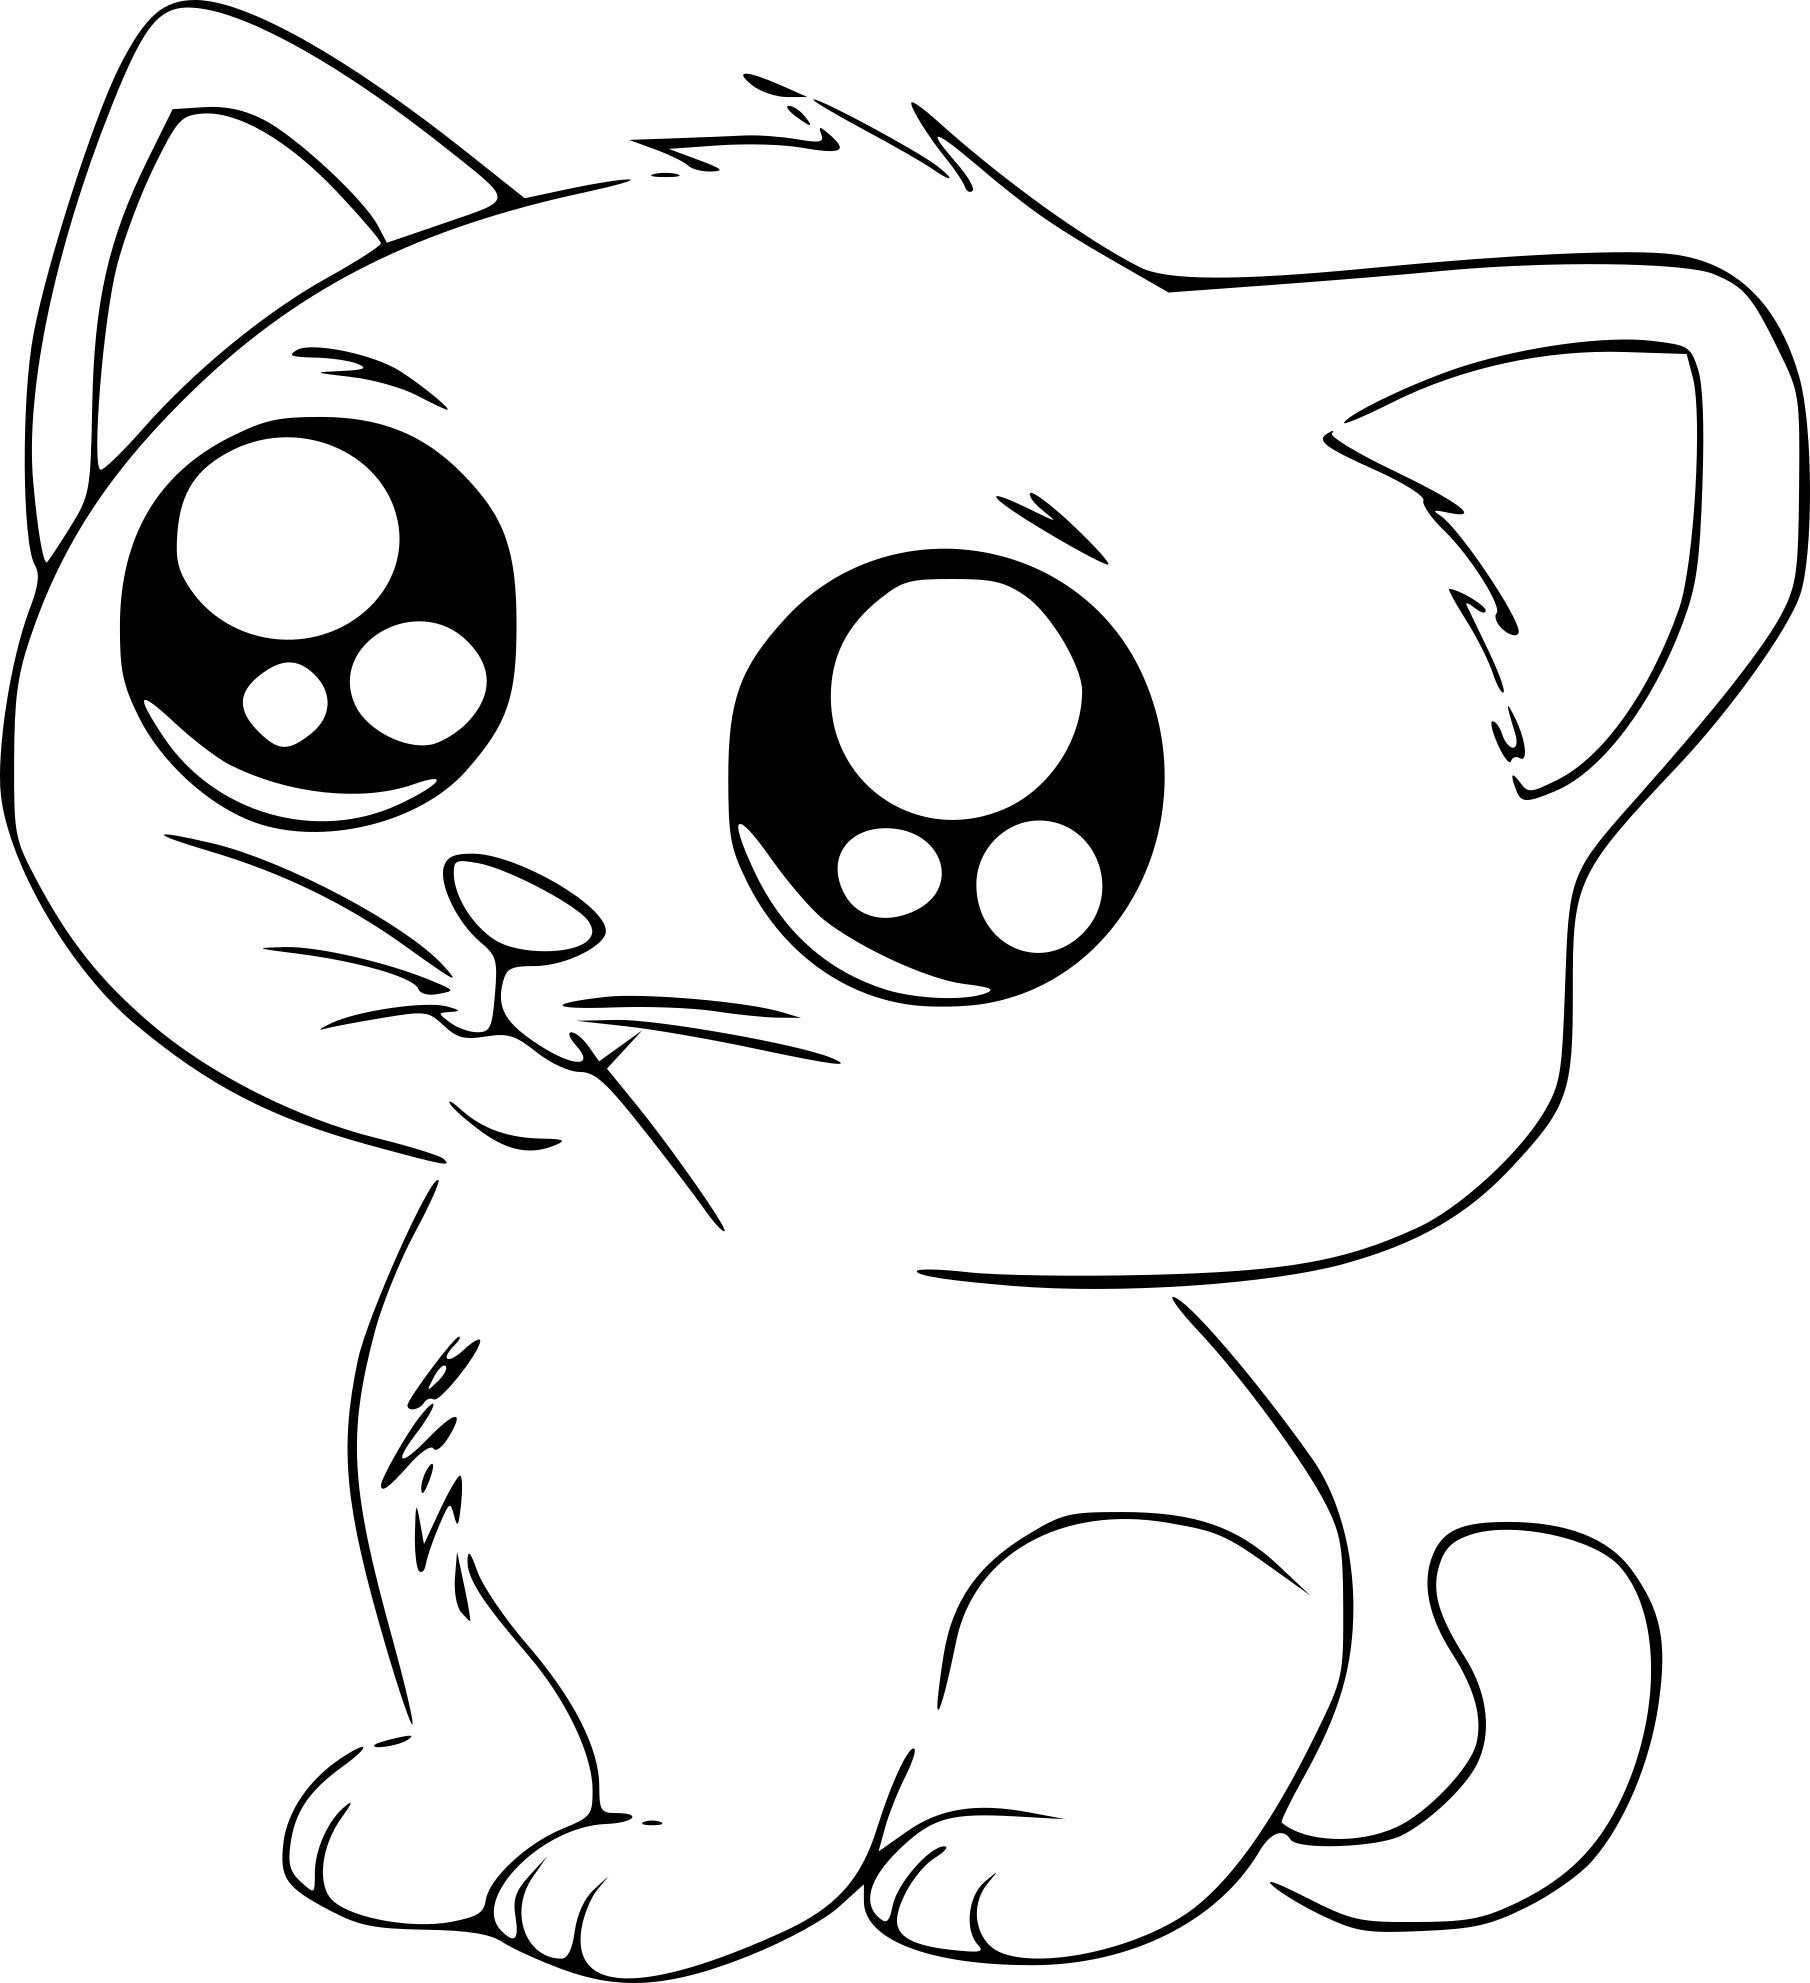 Manga cat coloring pages coloring manga pages in 2020